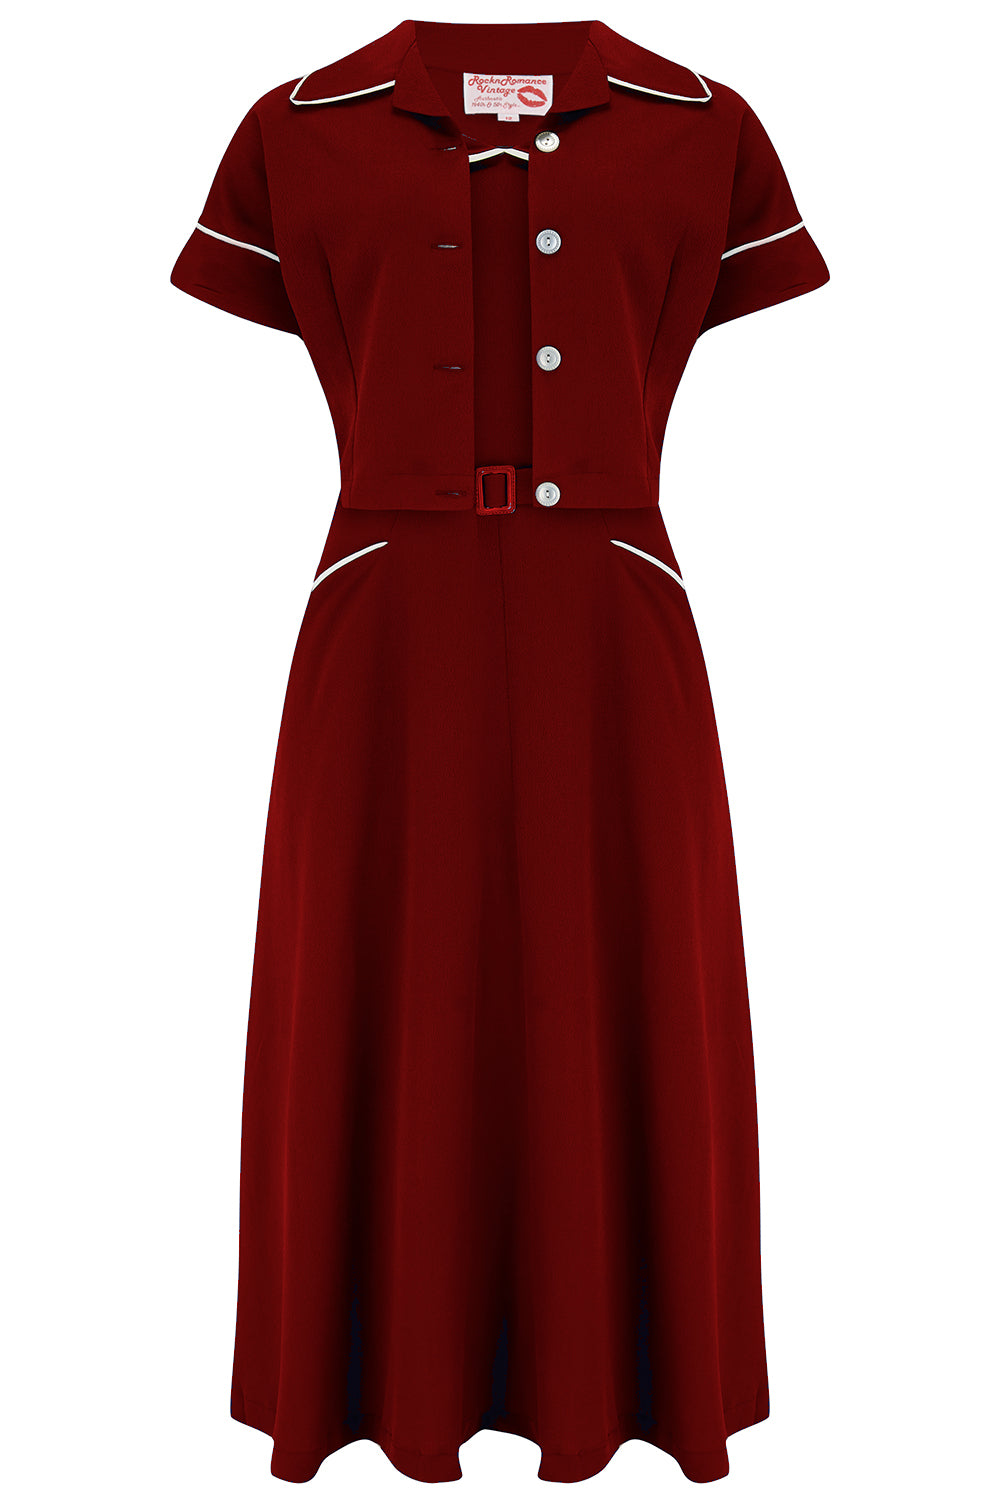 1940s Dresses | 40s Dress, Swing Dress, Tea Dresses The Lucille 2pc Sweetheart Dress  Bolero Set In Wine  Ivory Contrast True Late 1940s - Early 50s Vintage Style £59.00 AT vintagedancer.com